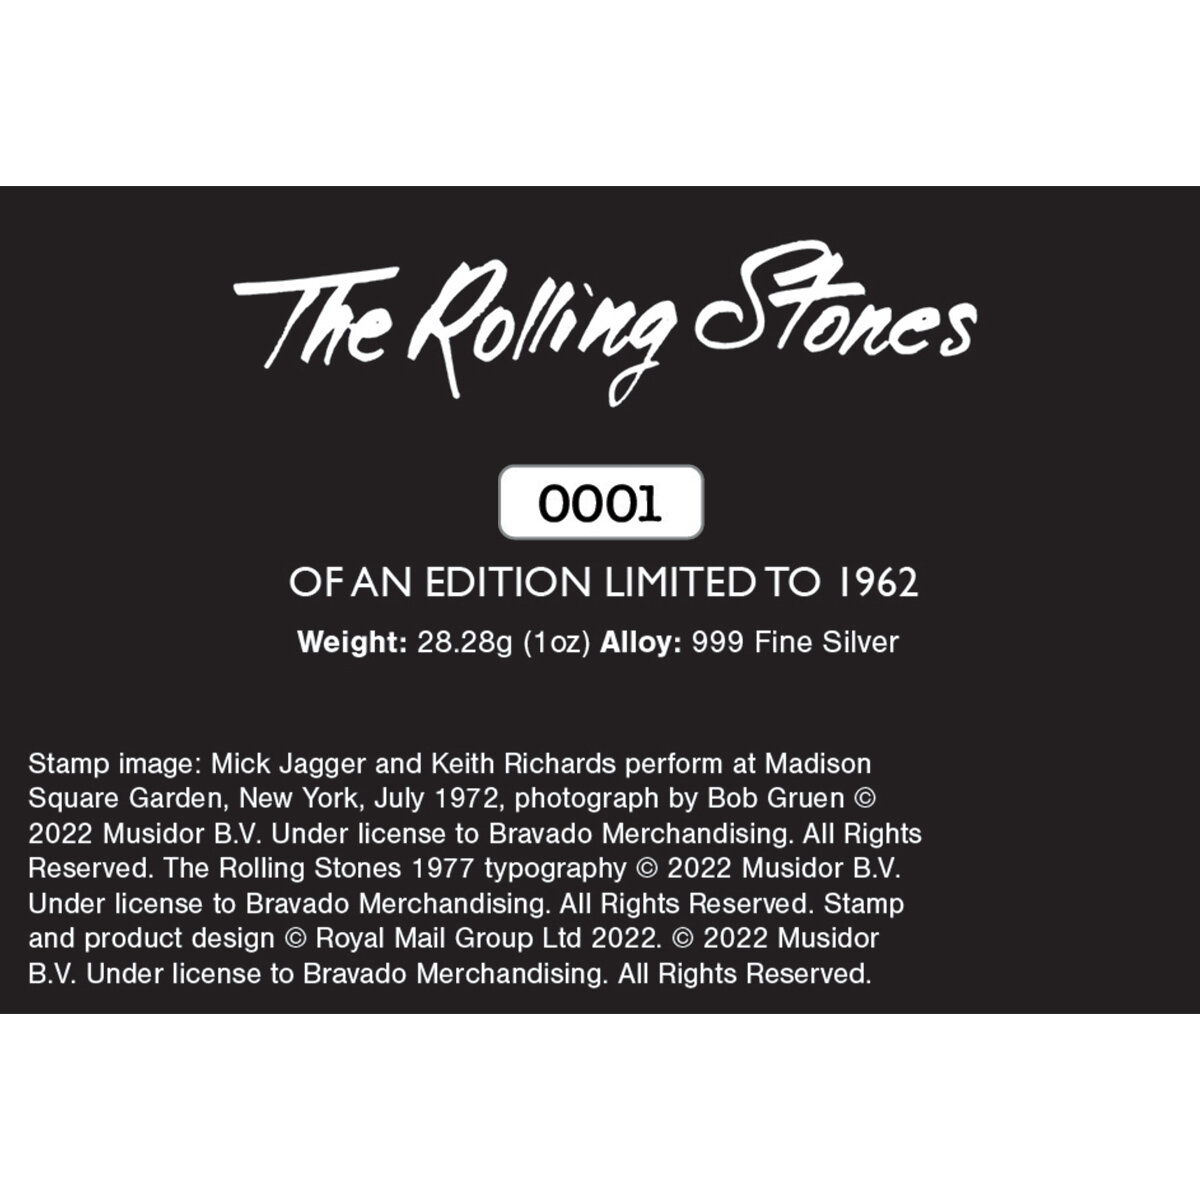 Buy The Rolling Stones Mick & Keith Silver Stamp Ingot Cert2 Image at Costco.co.uk